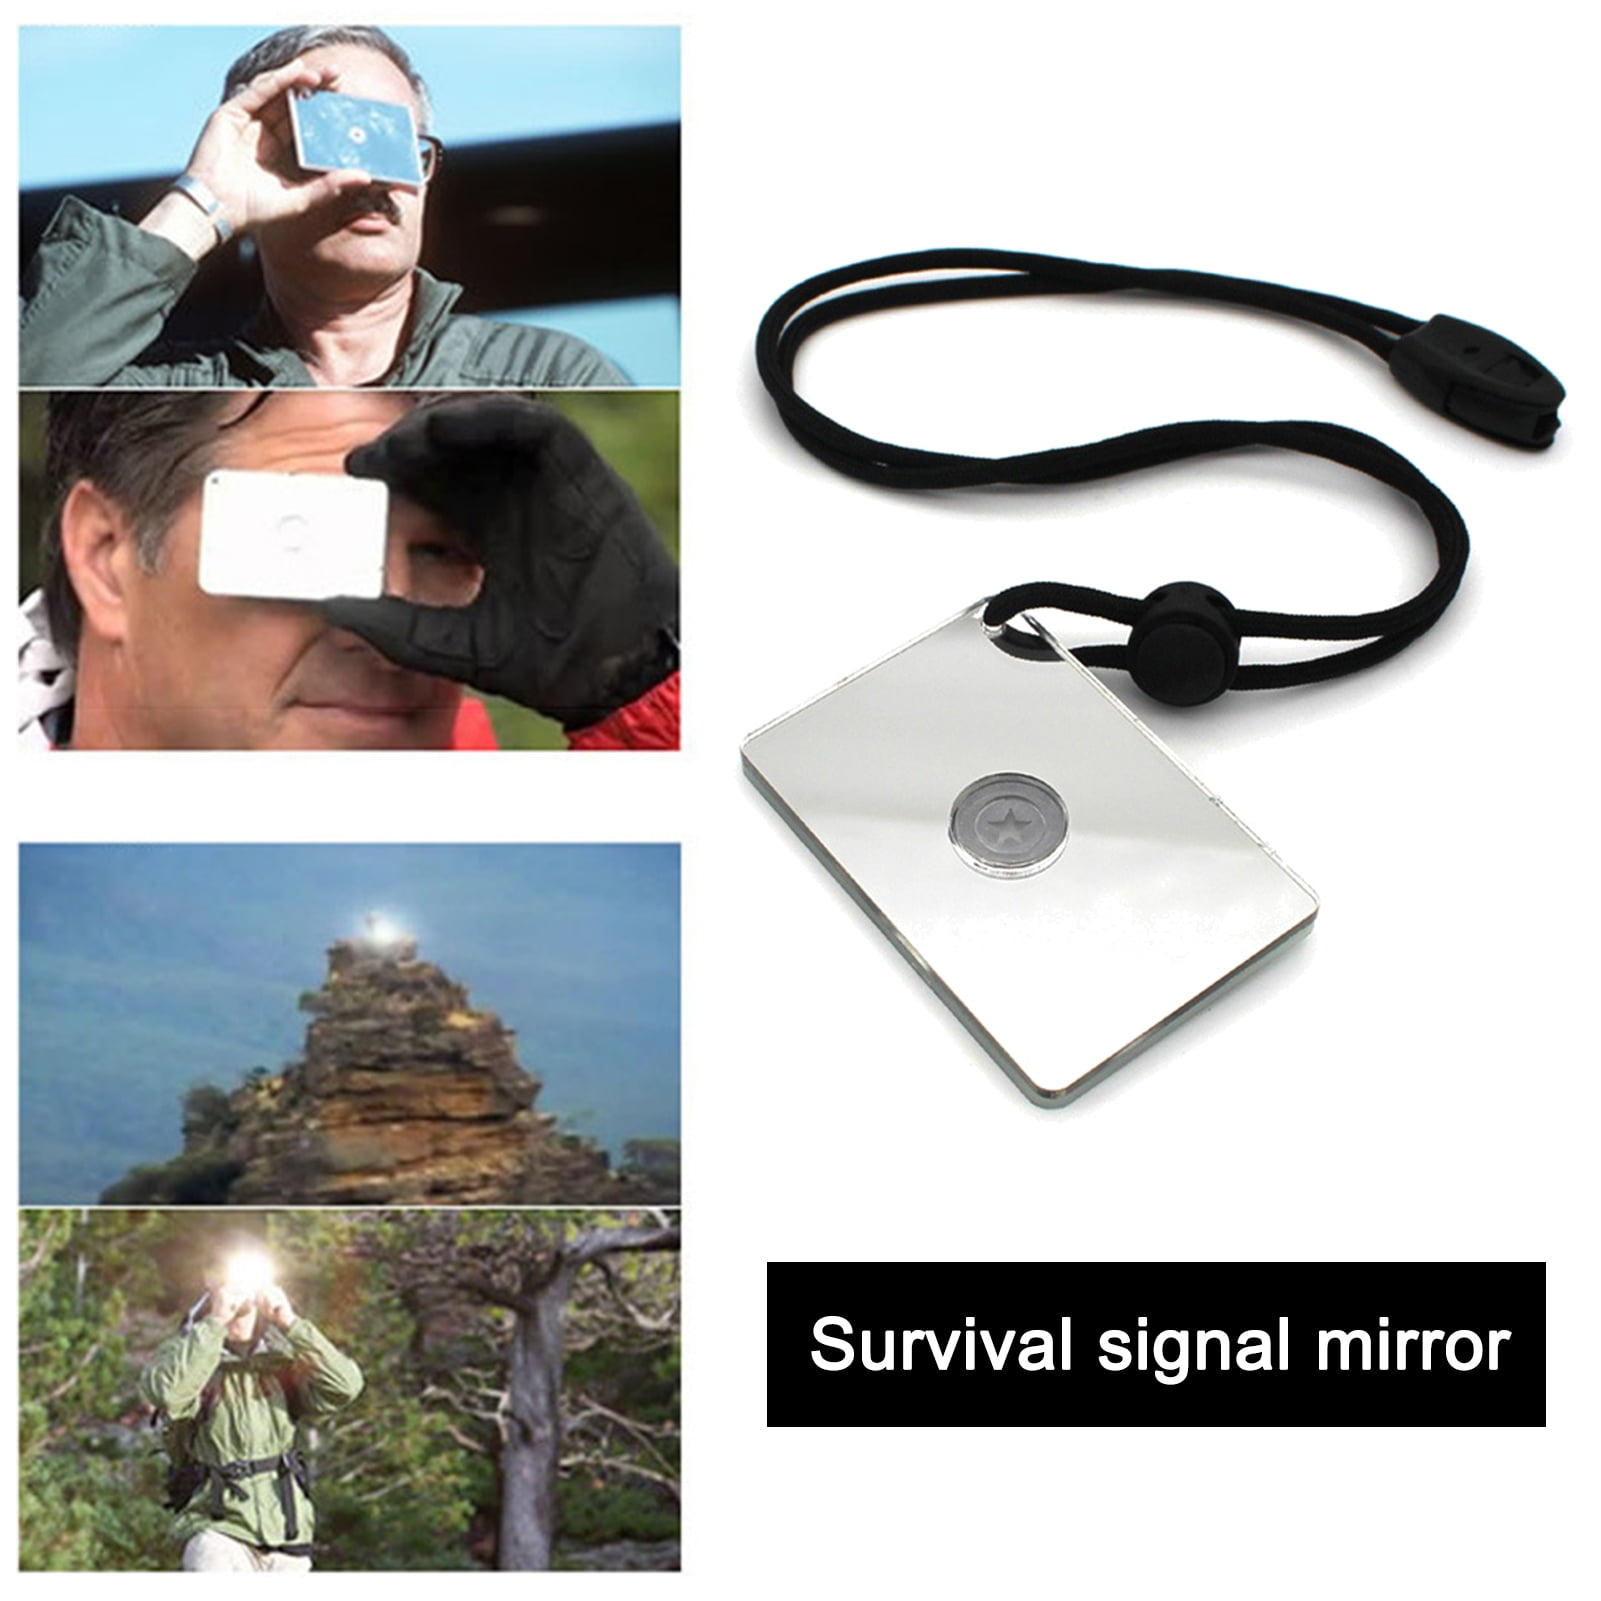 Multifunction Survival Emergency Rescue Signal Mirror Heliograph With RoOZ